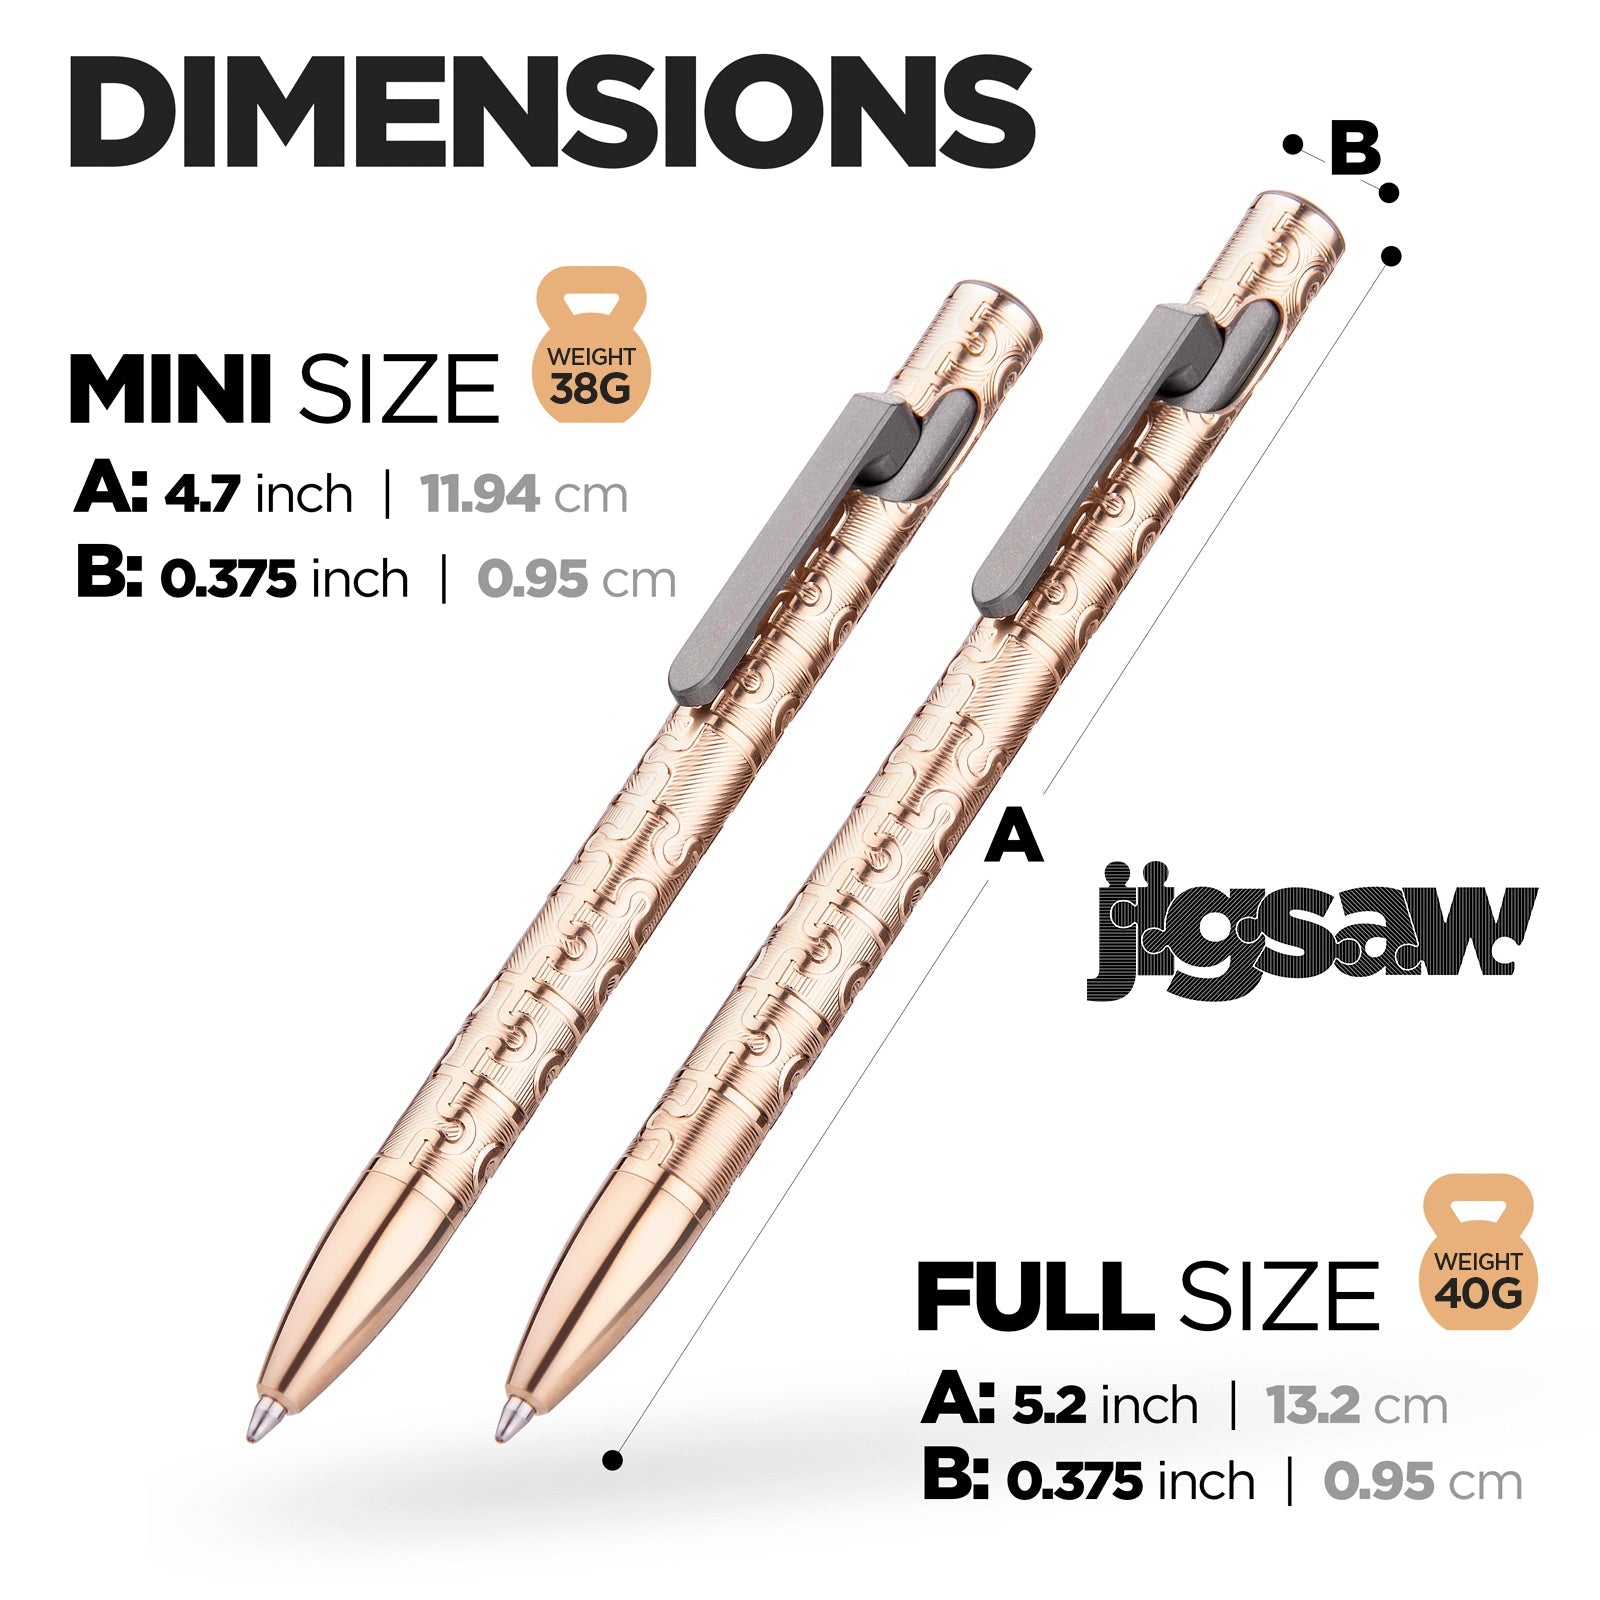 SMOOTH - Bolt Action Pen Jigsaw (Limited Edition)